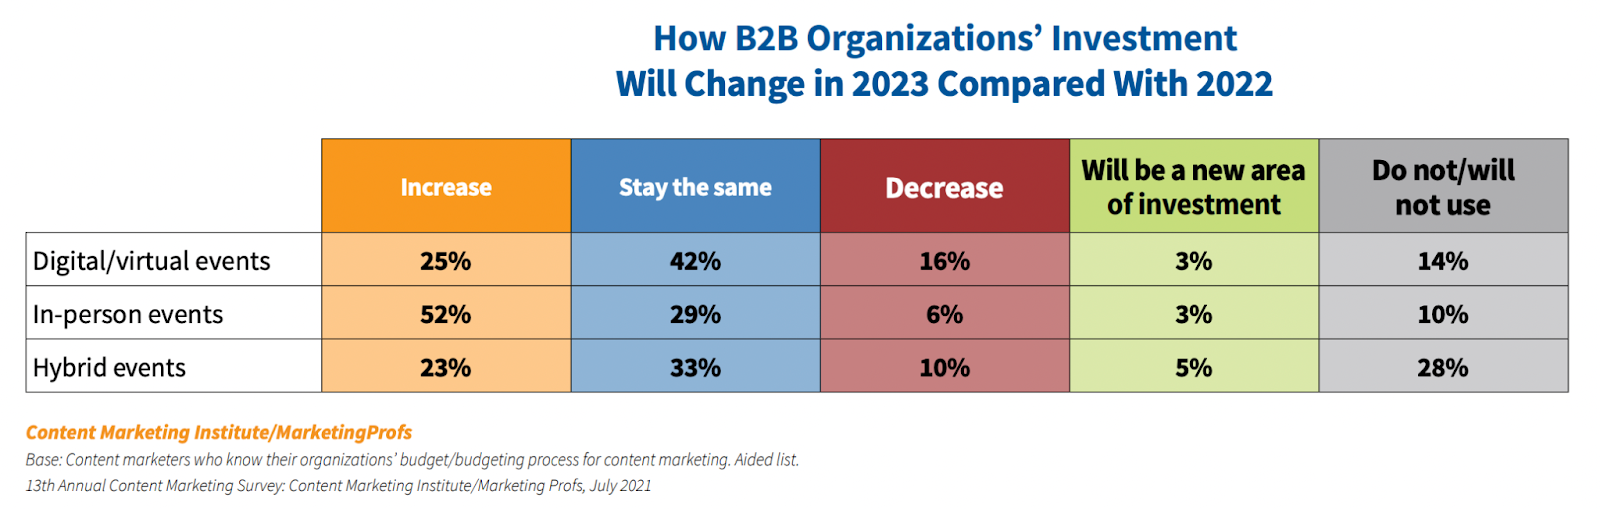 How B2B Organizations Investment Will Change in 2023 Compared With 2022